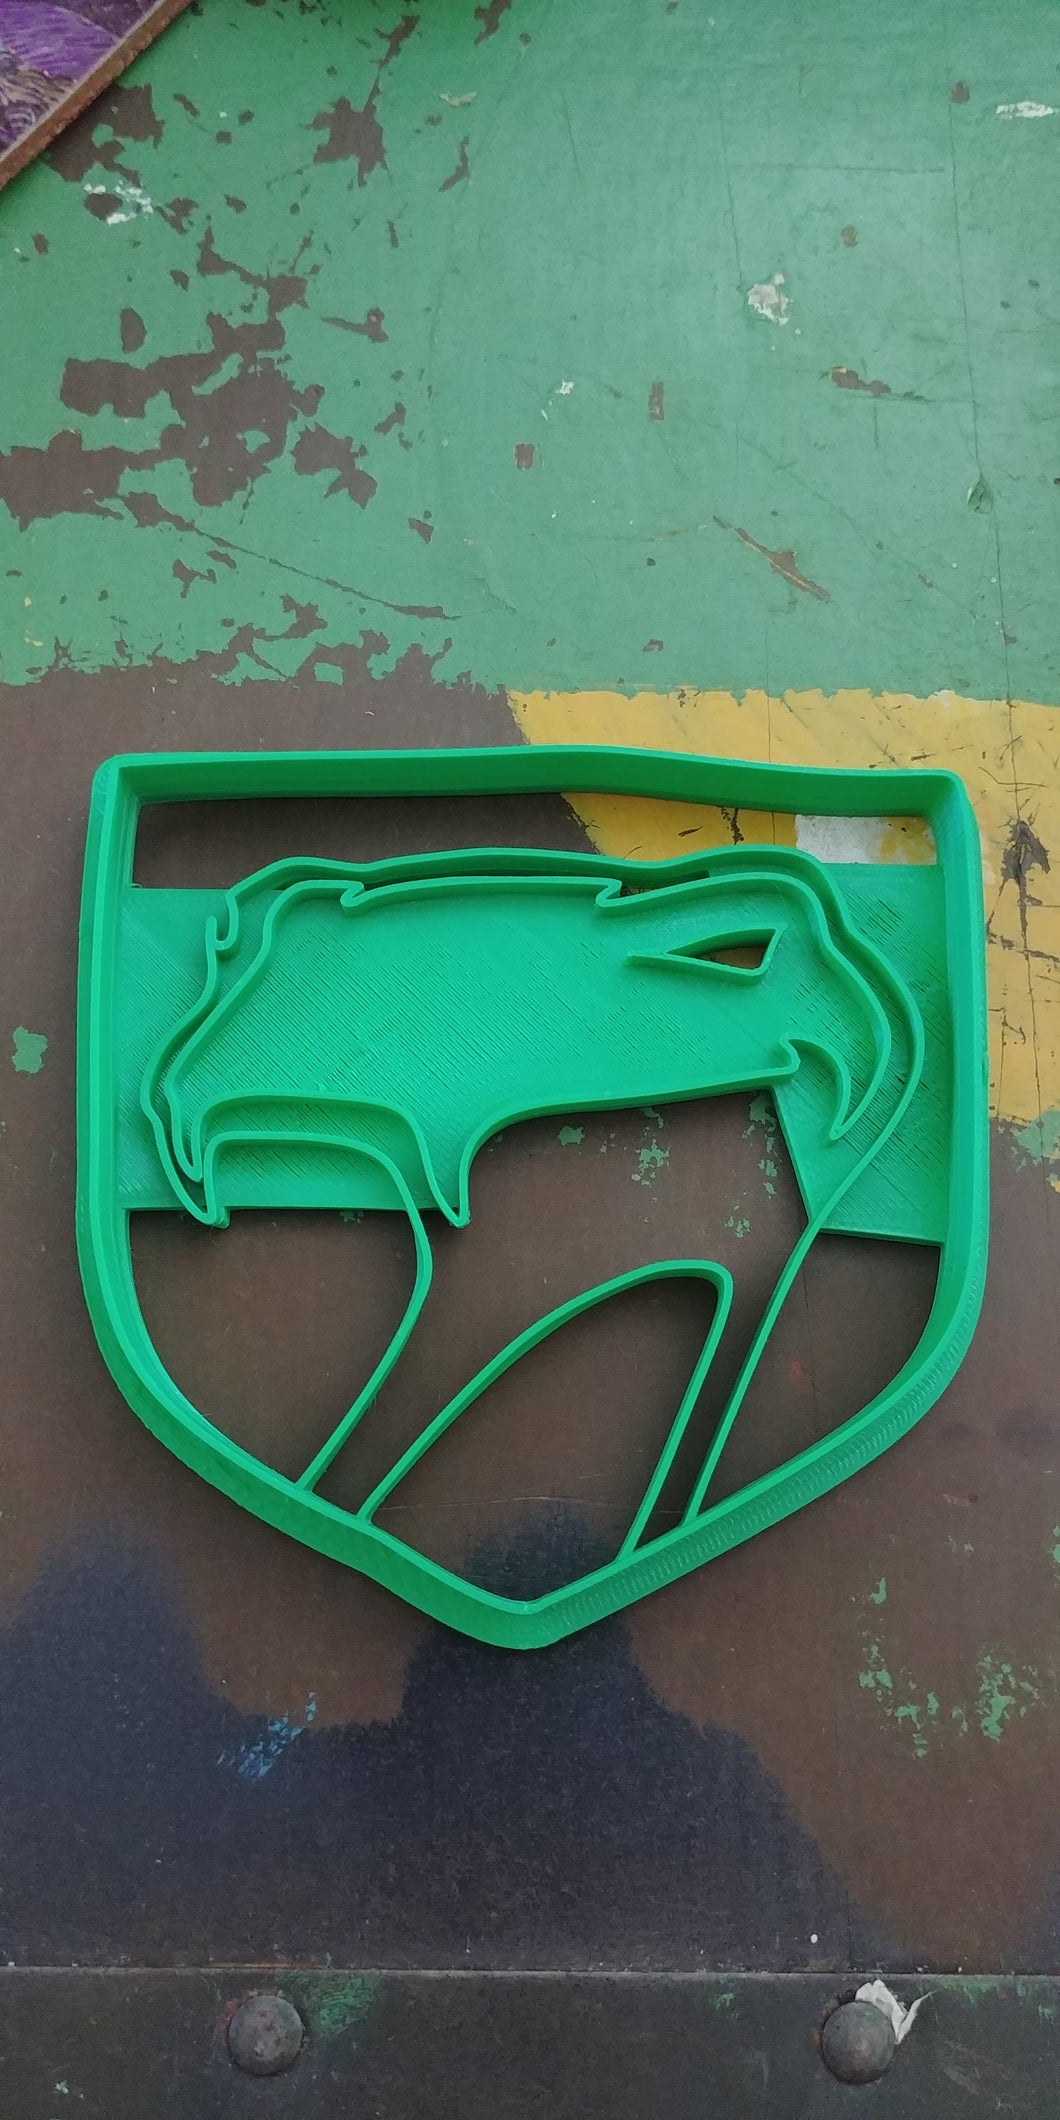 3D Printed Cookie Cutter Inspired by Dodge Viper Sneaky Pete Emblem